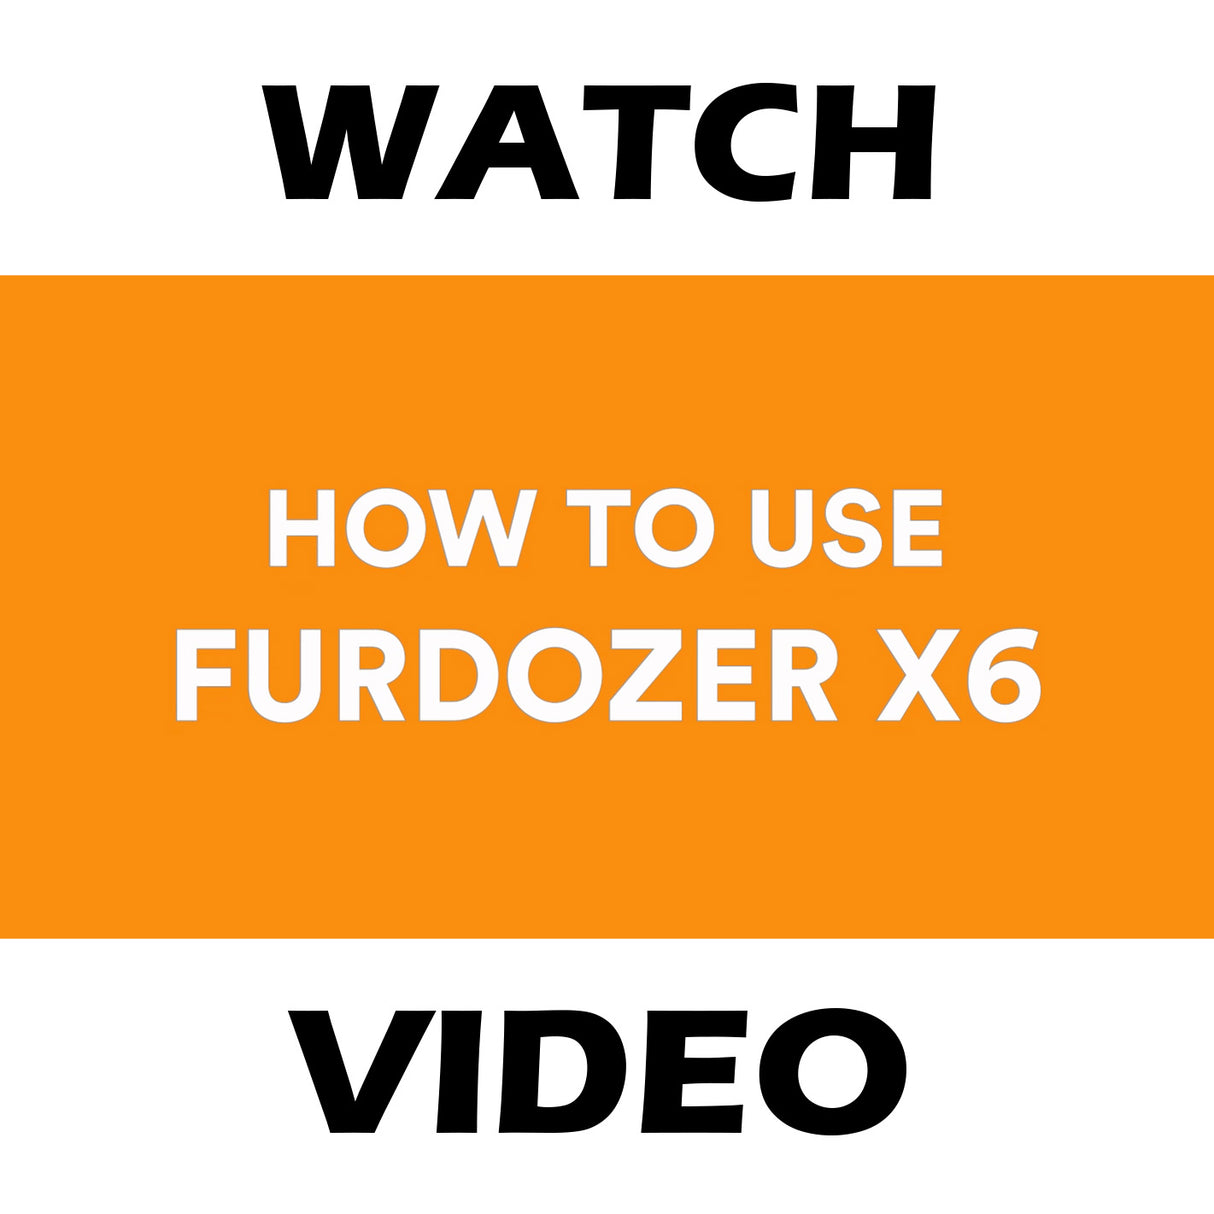 A video showing how to use the FurDozer X6